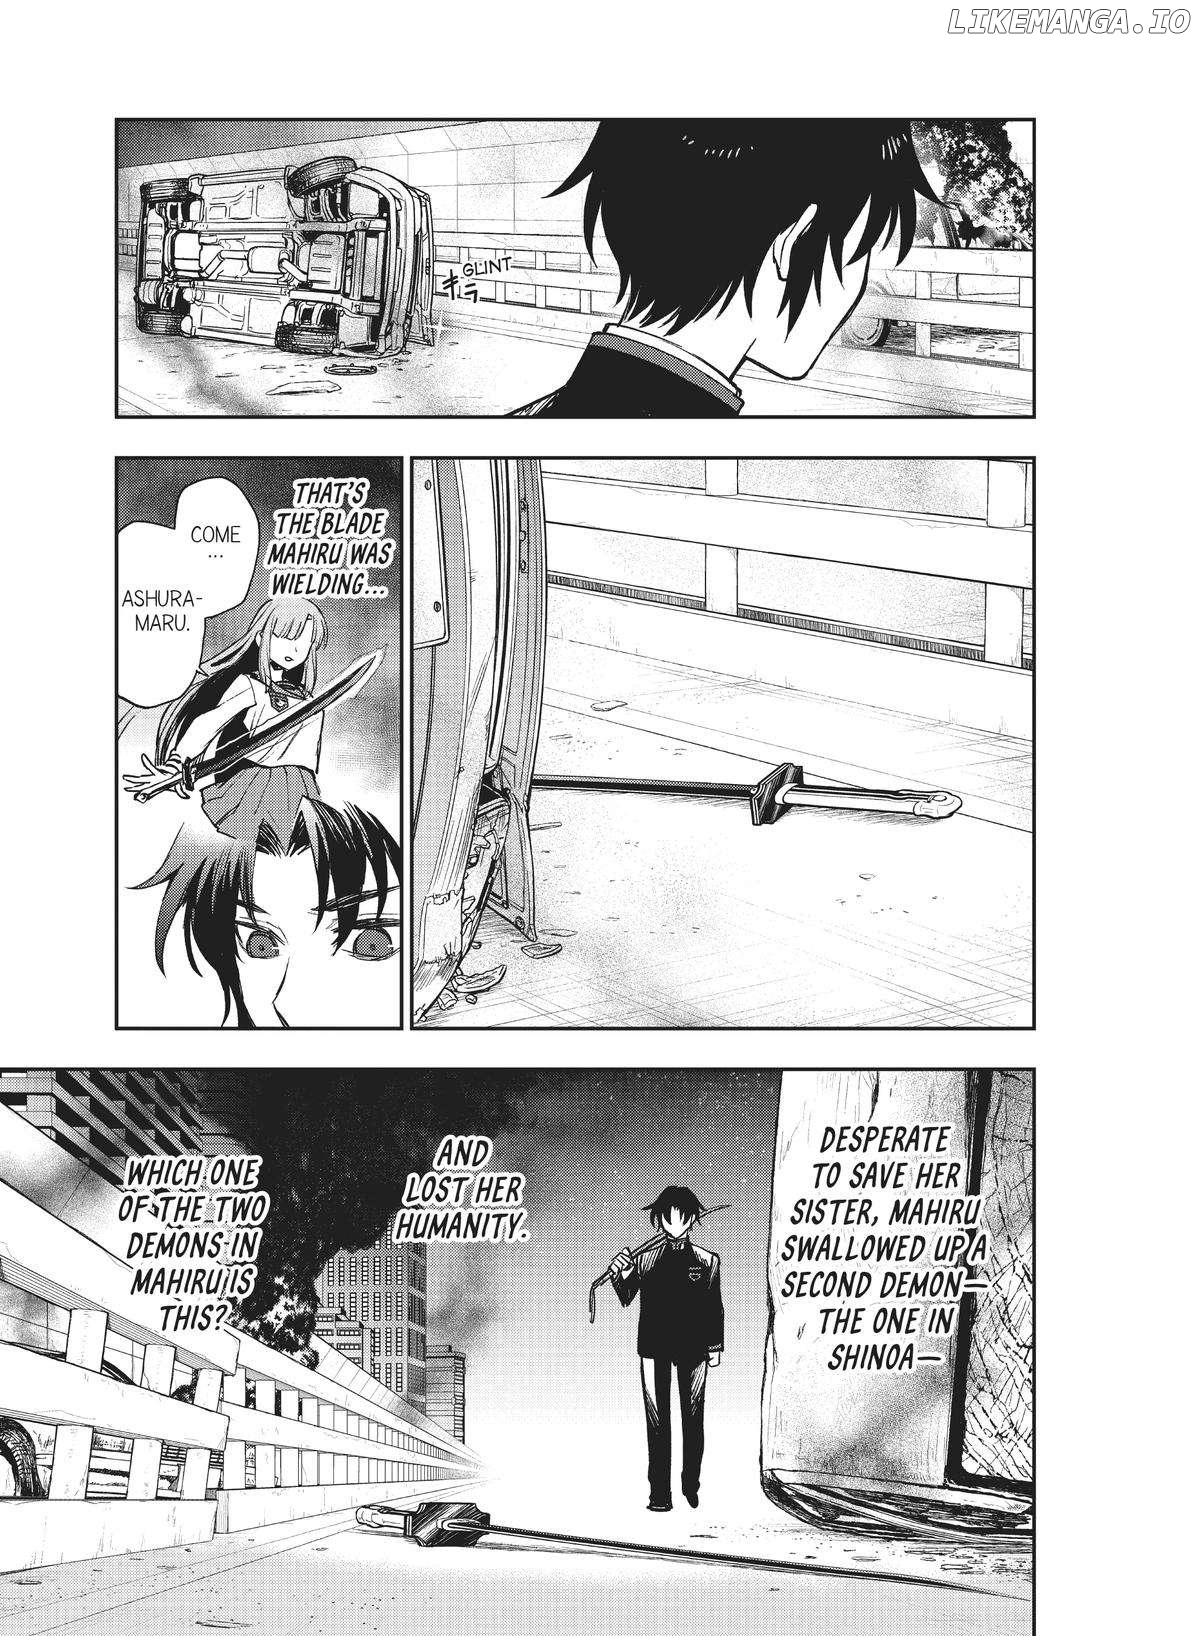 Seraph of the End: Guren Ichinose: Catastrophe at Sixteen Chapter 30 - page 7